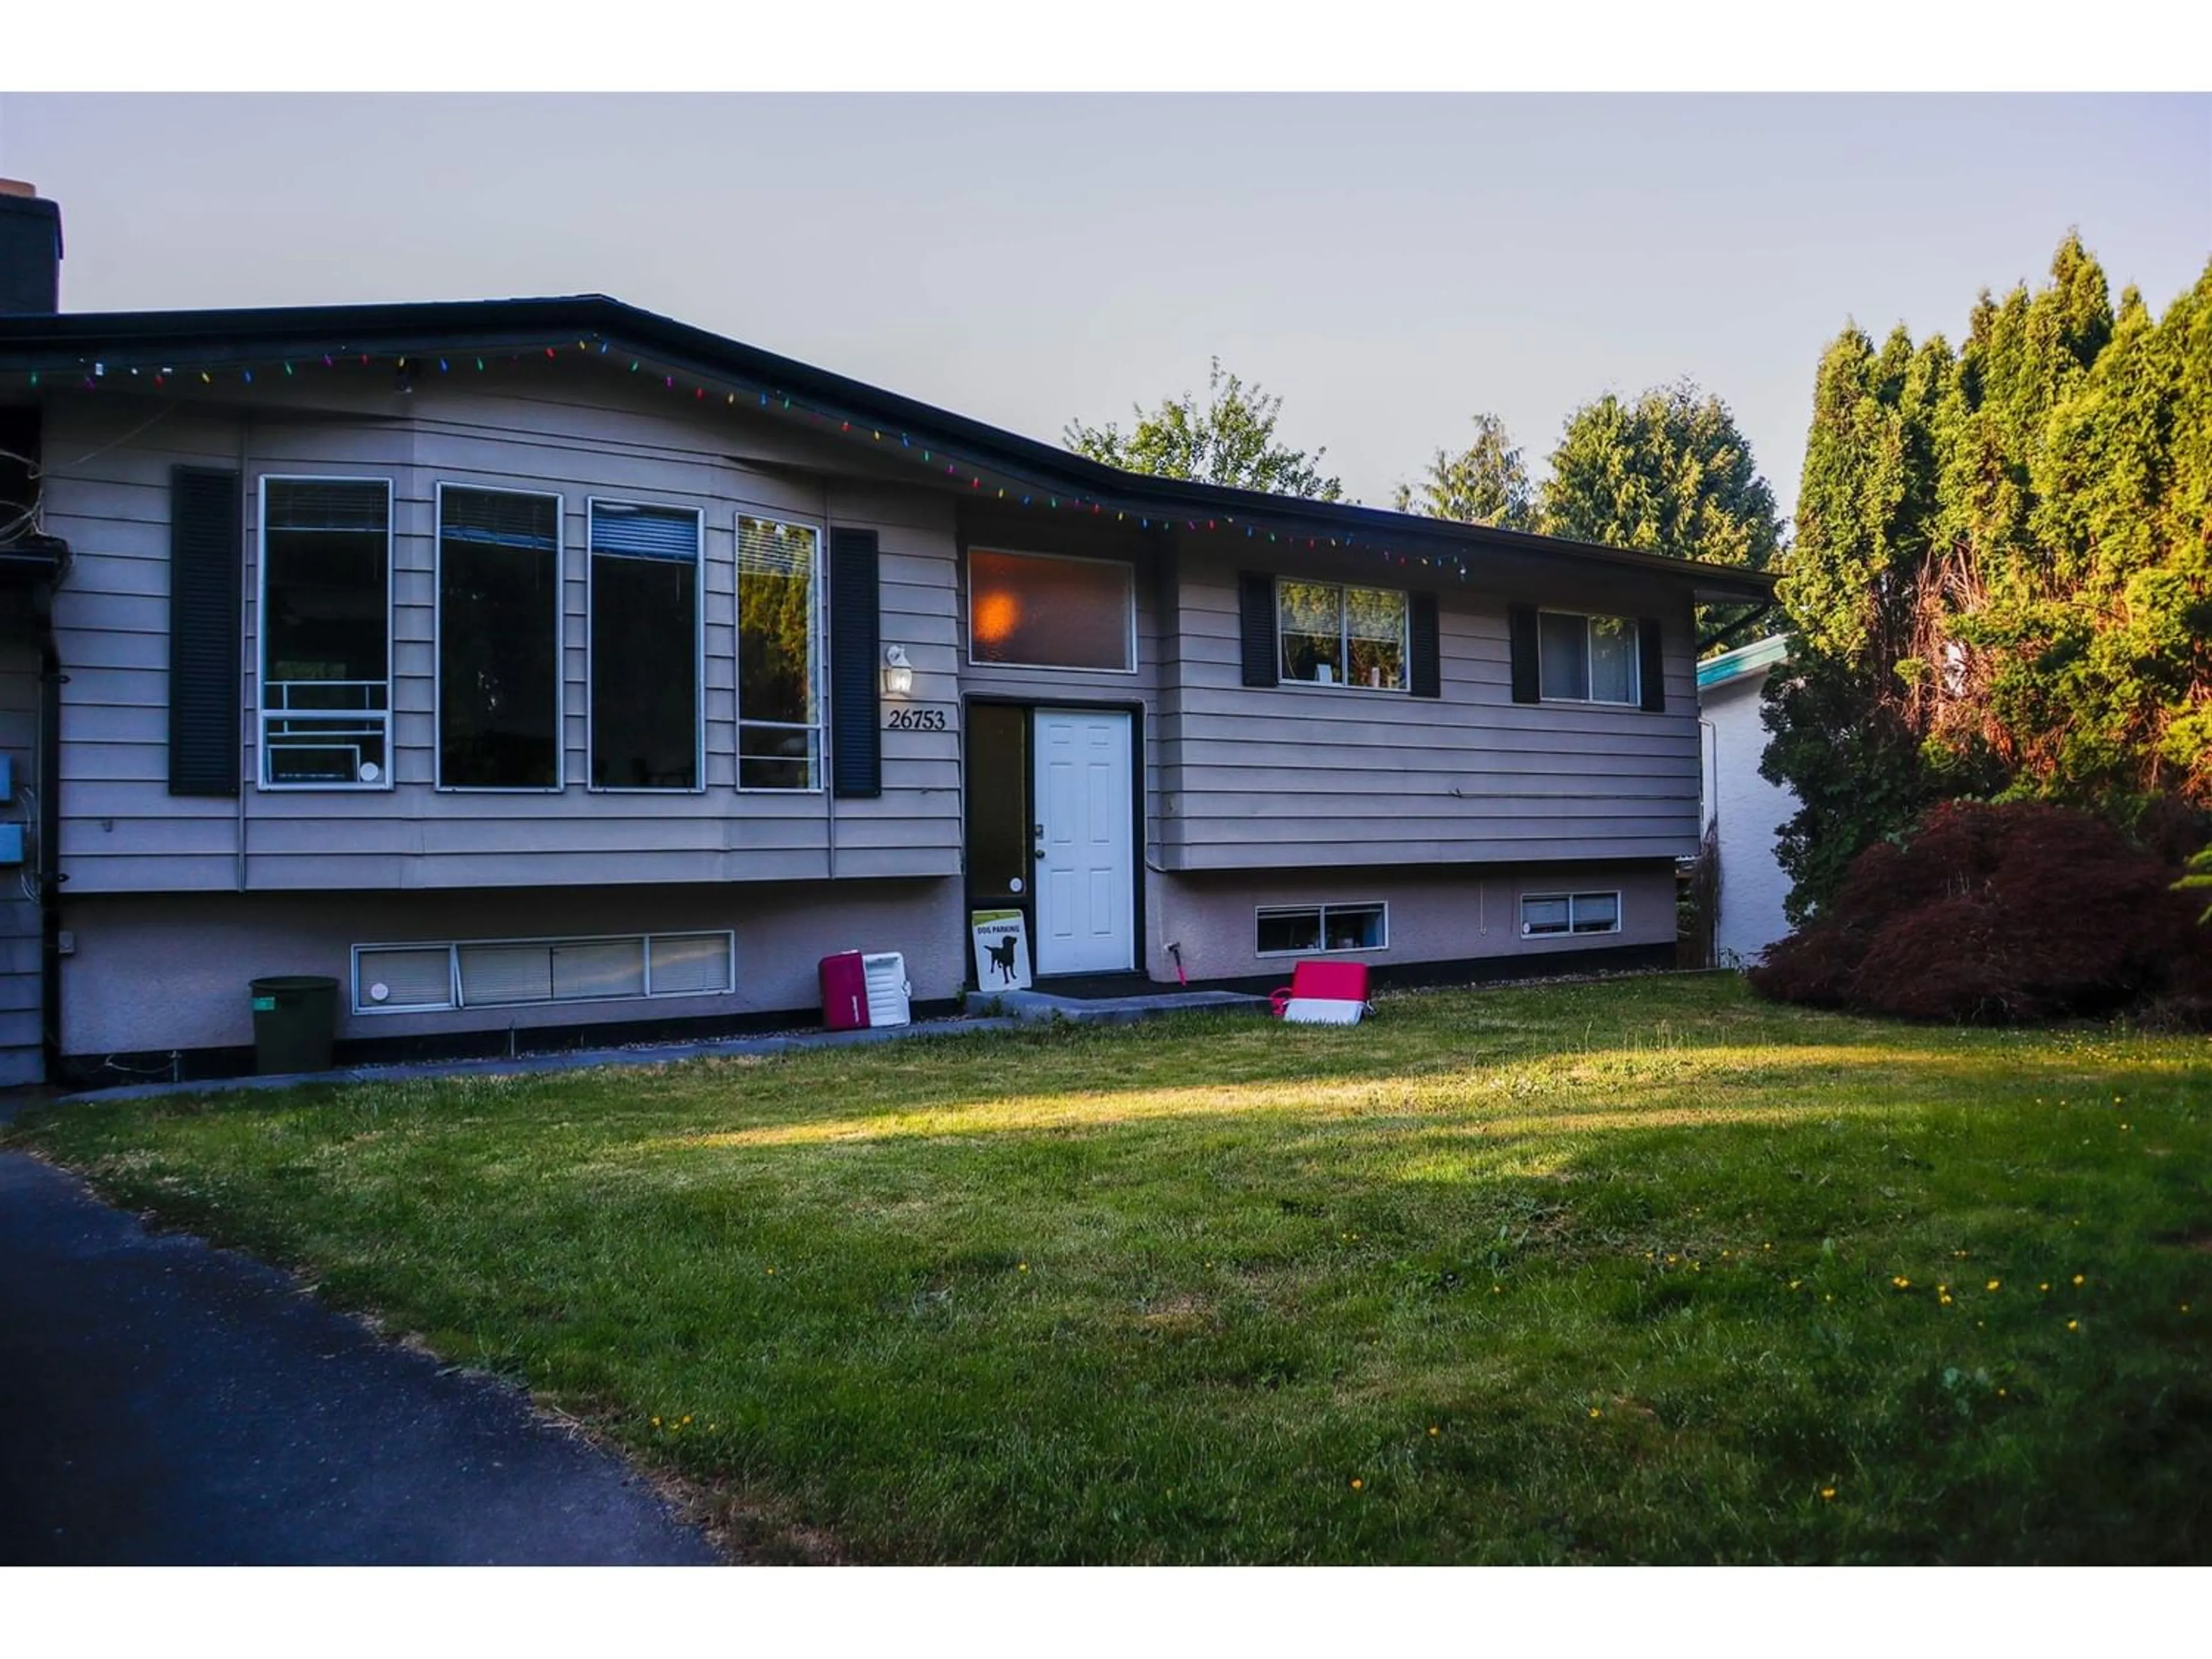 Frontside or backside of a home for 26753 30 AVENUE, Langley British Columbia V4W3B9